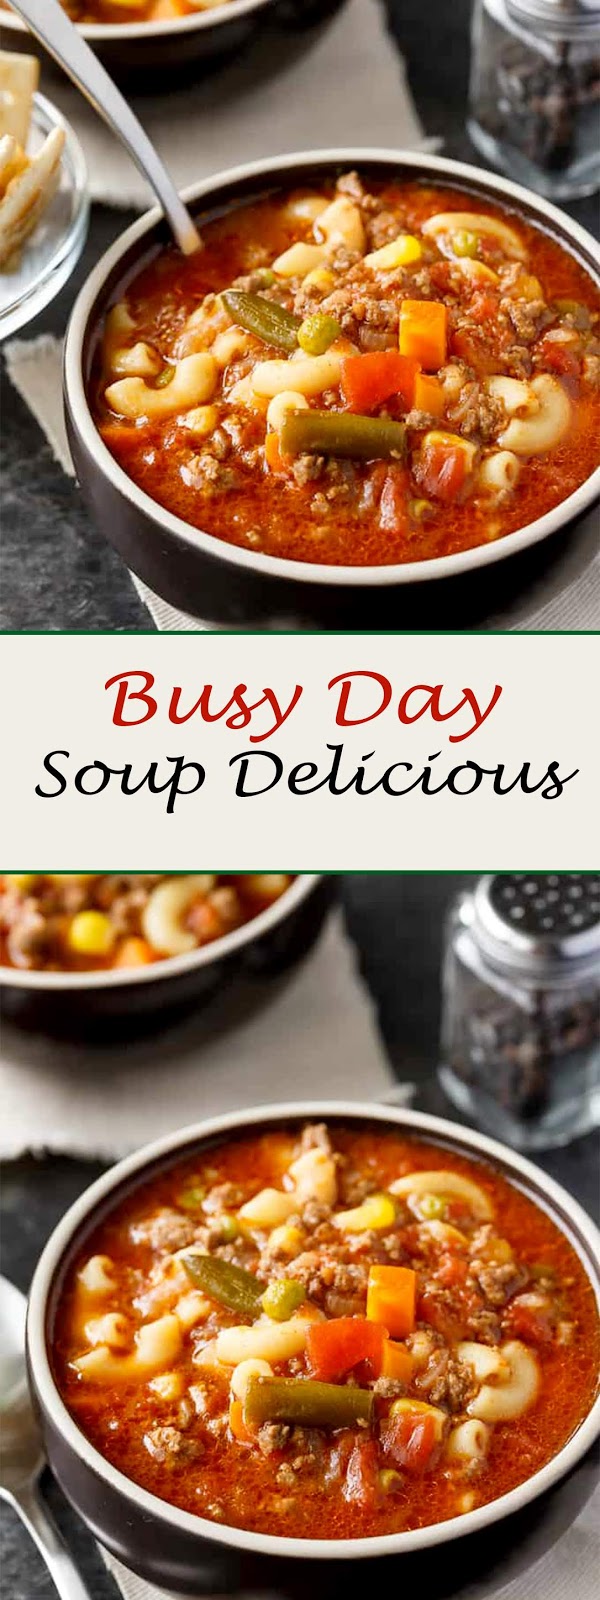 Busy Day Soup Delcious - Me Tasty